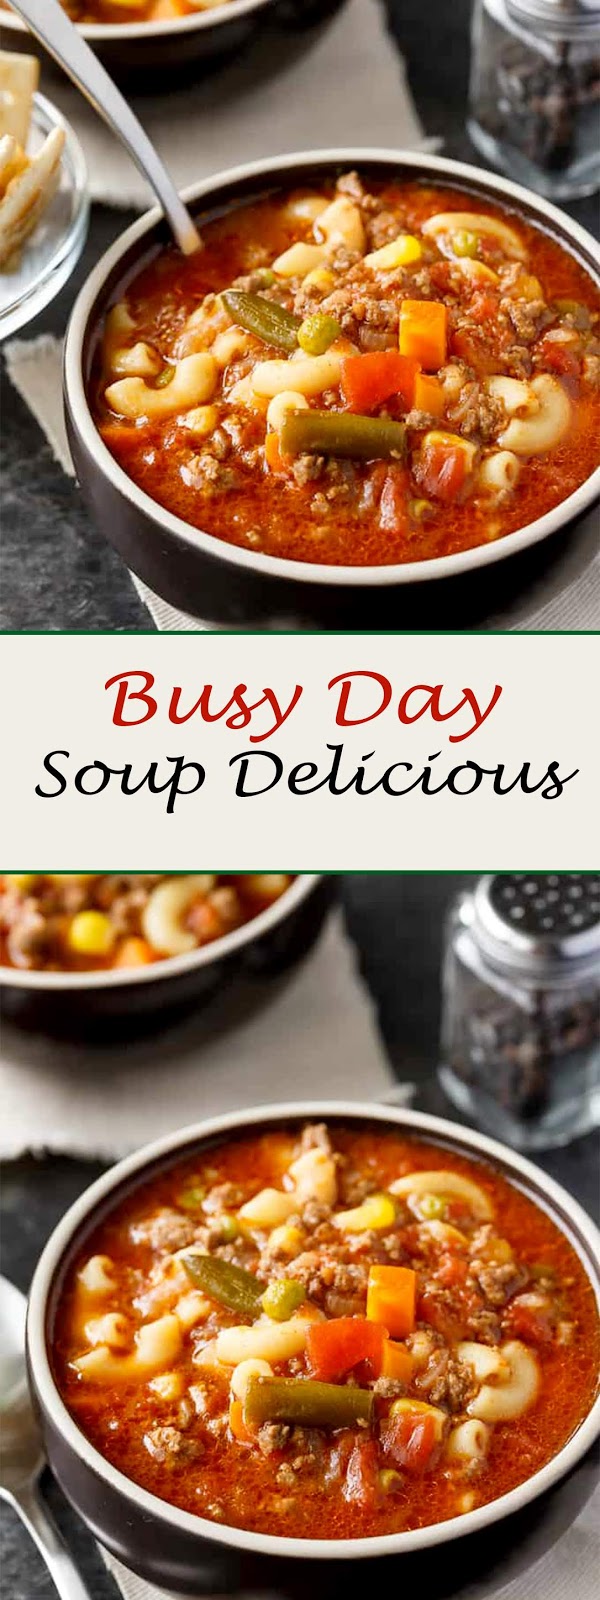 Busy Day Soup Delcious - Me Tasty